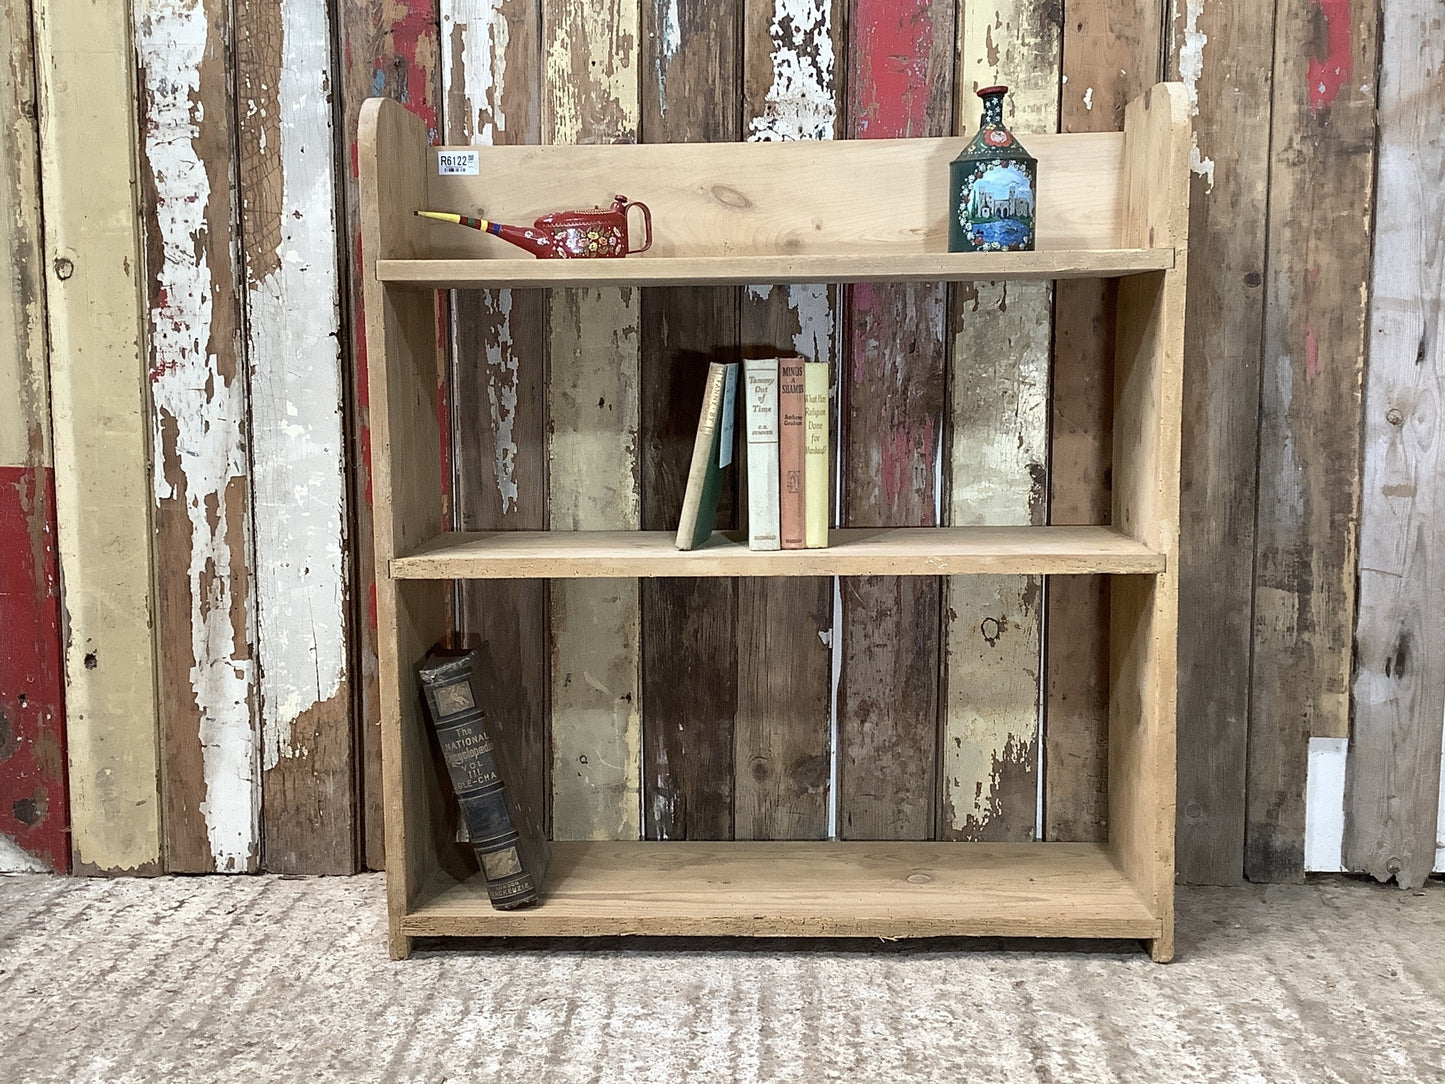 Old Rustic Stripped Pine Freestanding Wall Shelves 3 Shelves 2'9"H 2'6" W